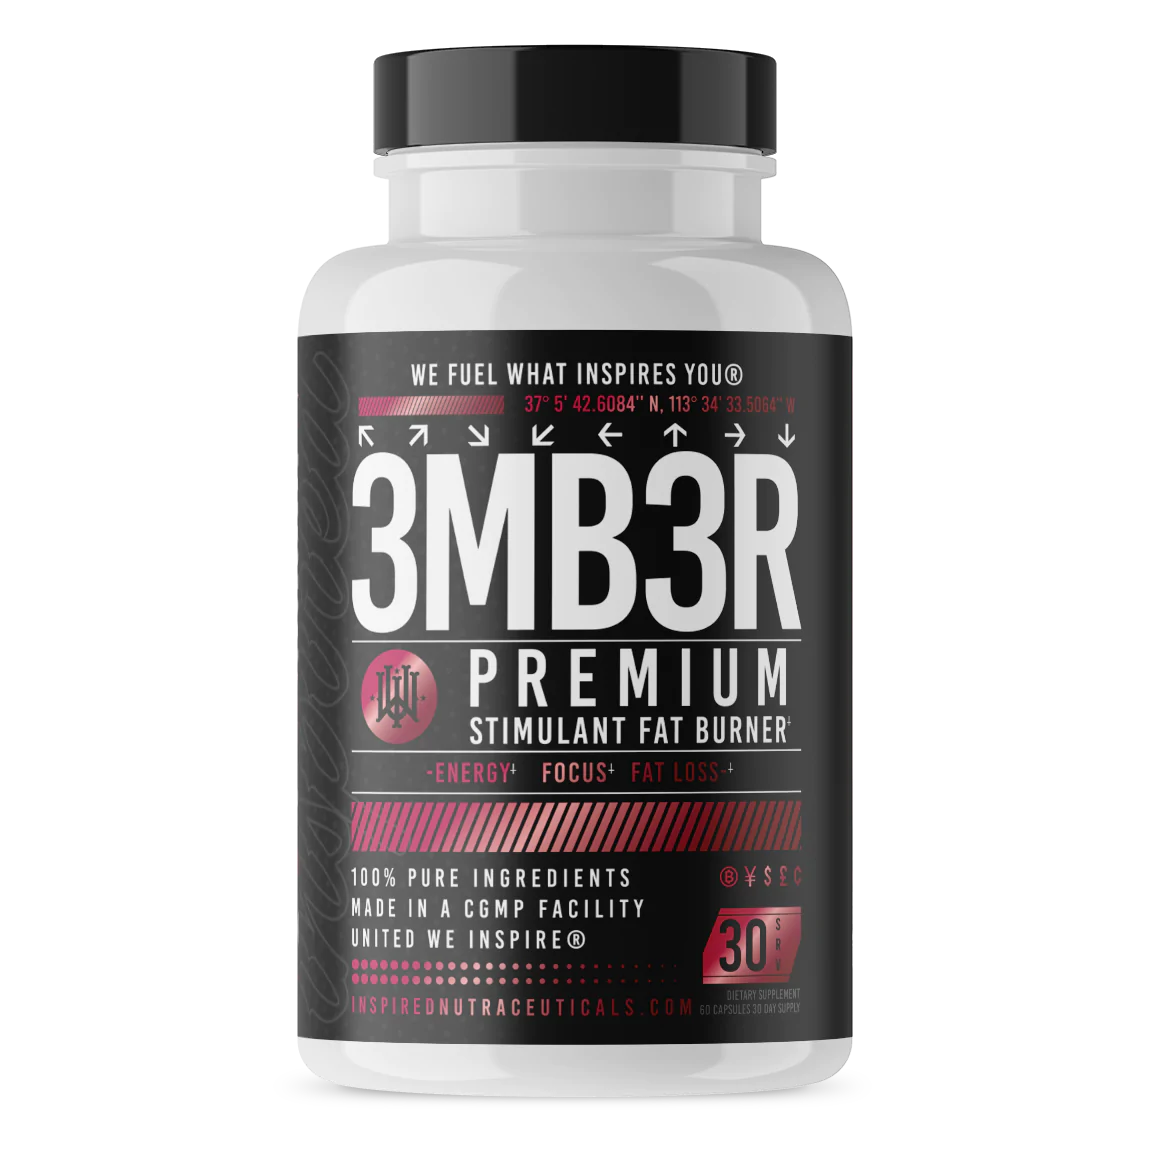 Inspired Nutraceuticals 3MB3R Stim